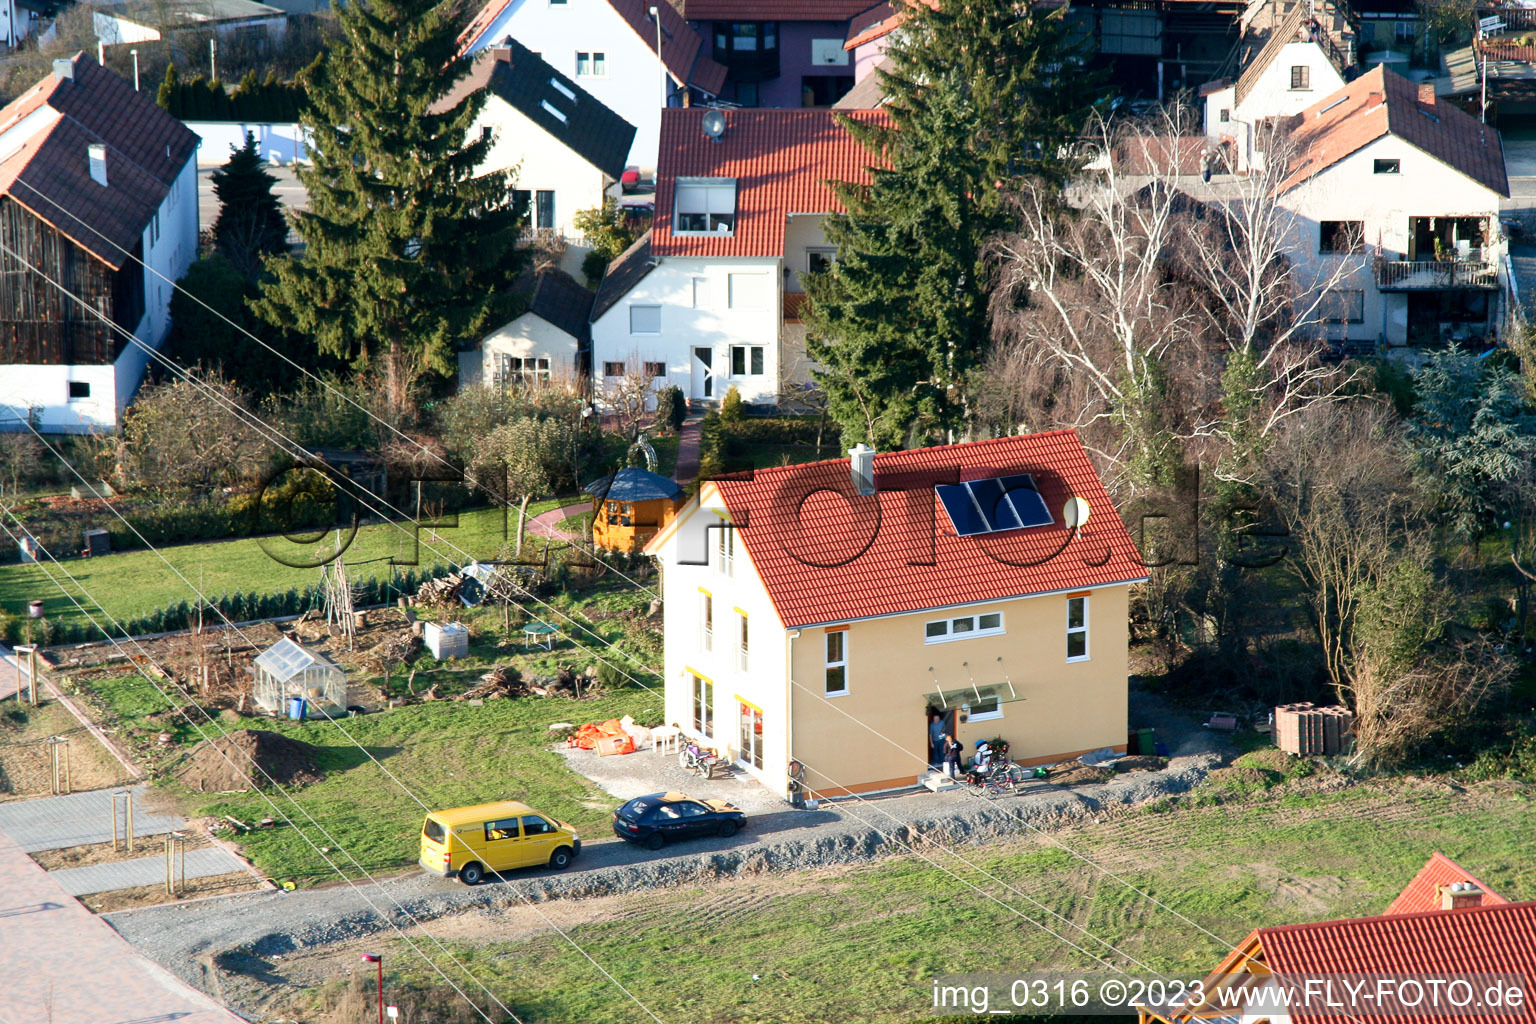 New development area at the Tongruben in Rheinzabern in the state Rhineland-Palatinate, Germany from a drone